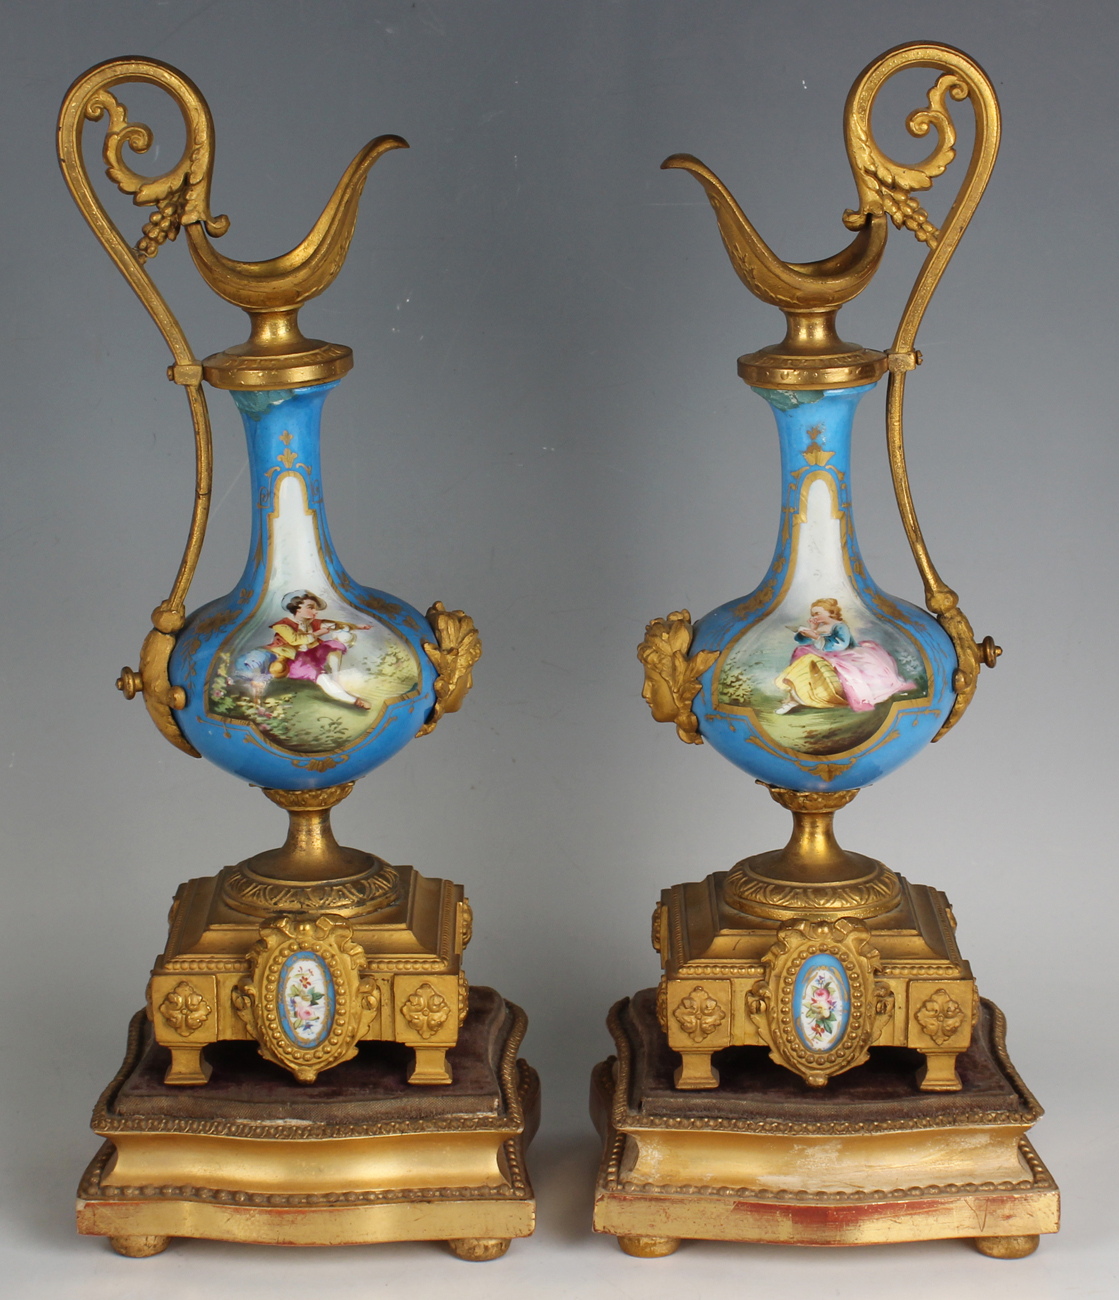 A late 19th century French gilt metal and porcelain mantel clock with eight day movement striking on - Image 5 of 12